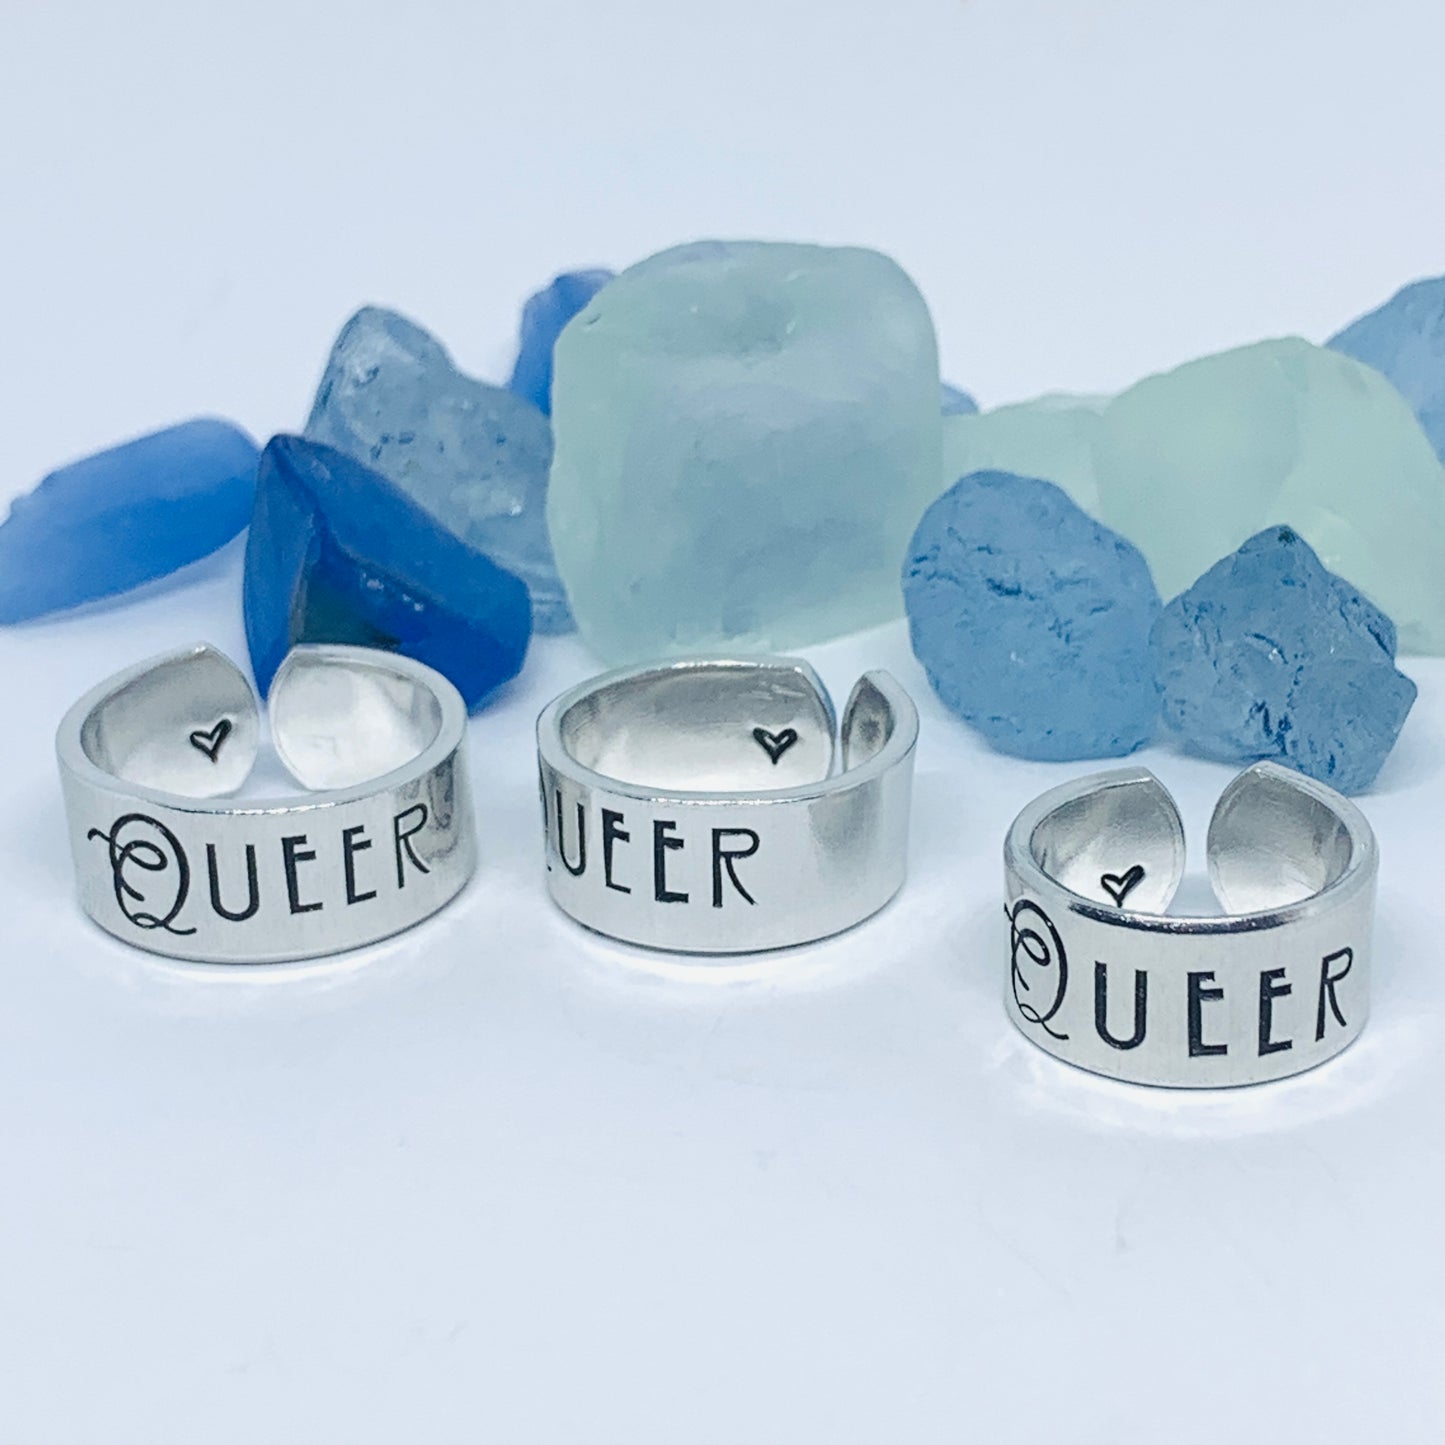 QUEER Hand Stamped Ring | ODAT Ring | Stamped Metal Cuff Ring | LGBTQ AI + Ally | Acceptance Jewelry | Gender Identity